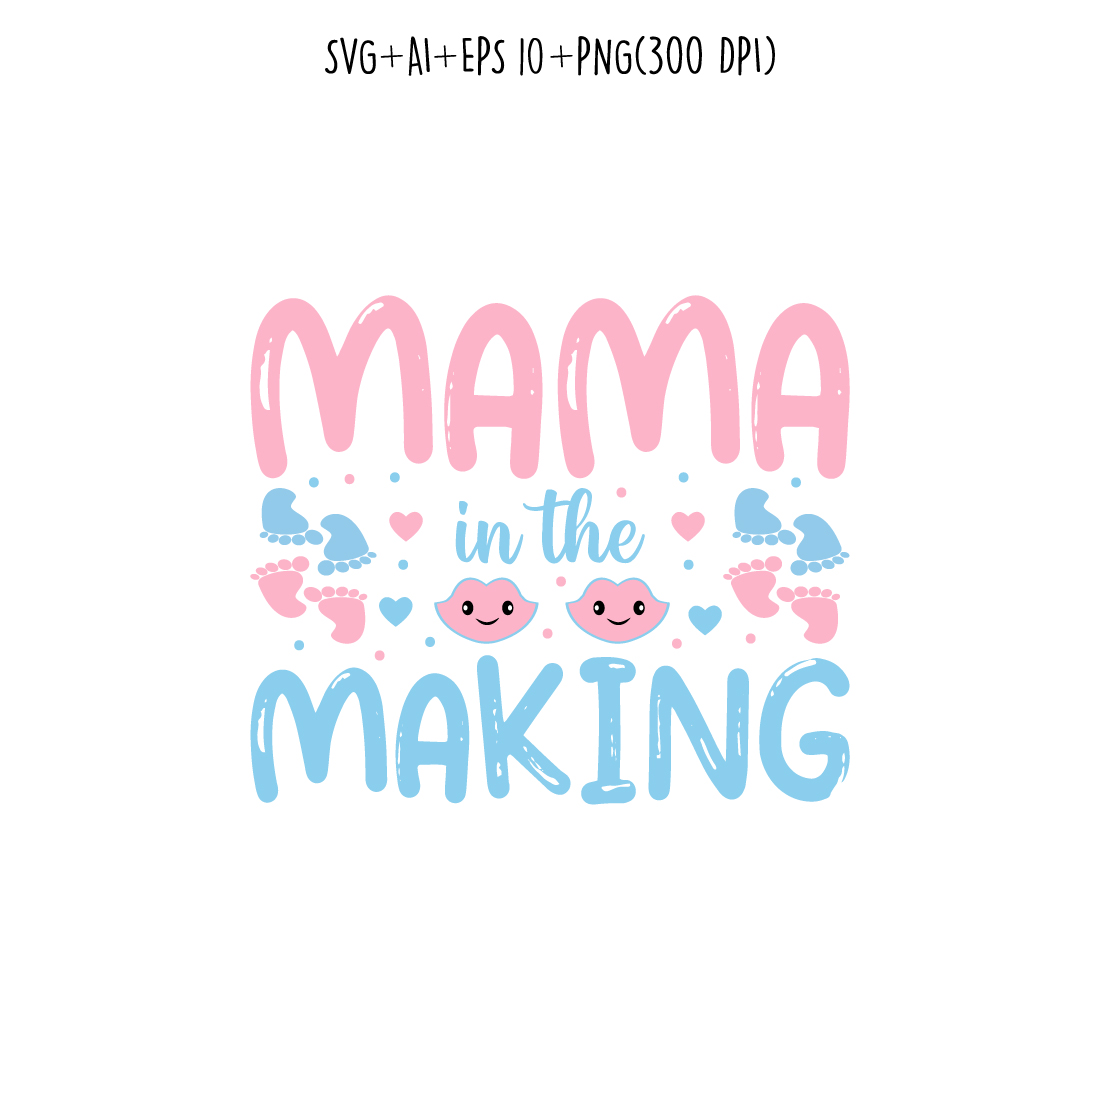 mama in the making pregnancy t-shirt design for t-shirts, cards, frame artwork, phone cases, bags, mugs, stickers, tumblers, print, etc cover image.